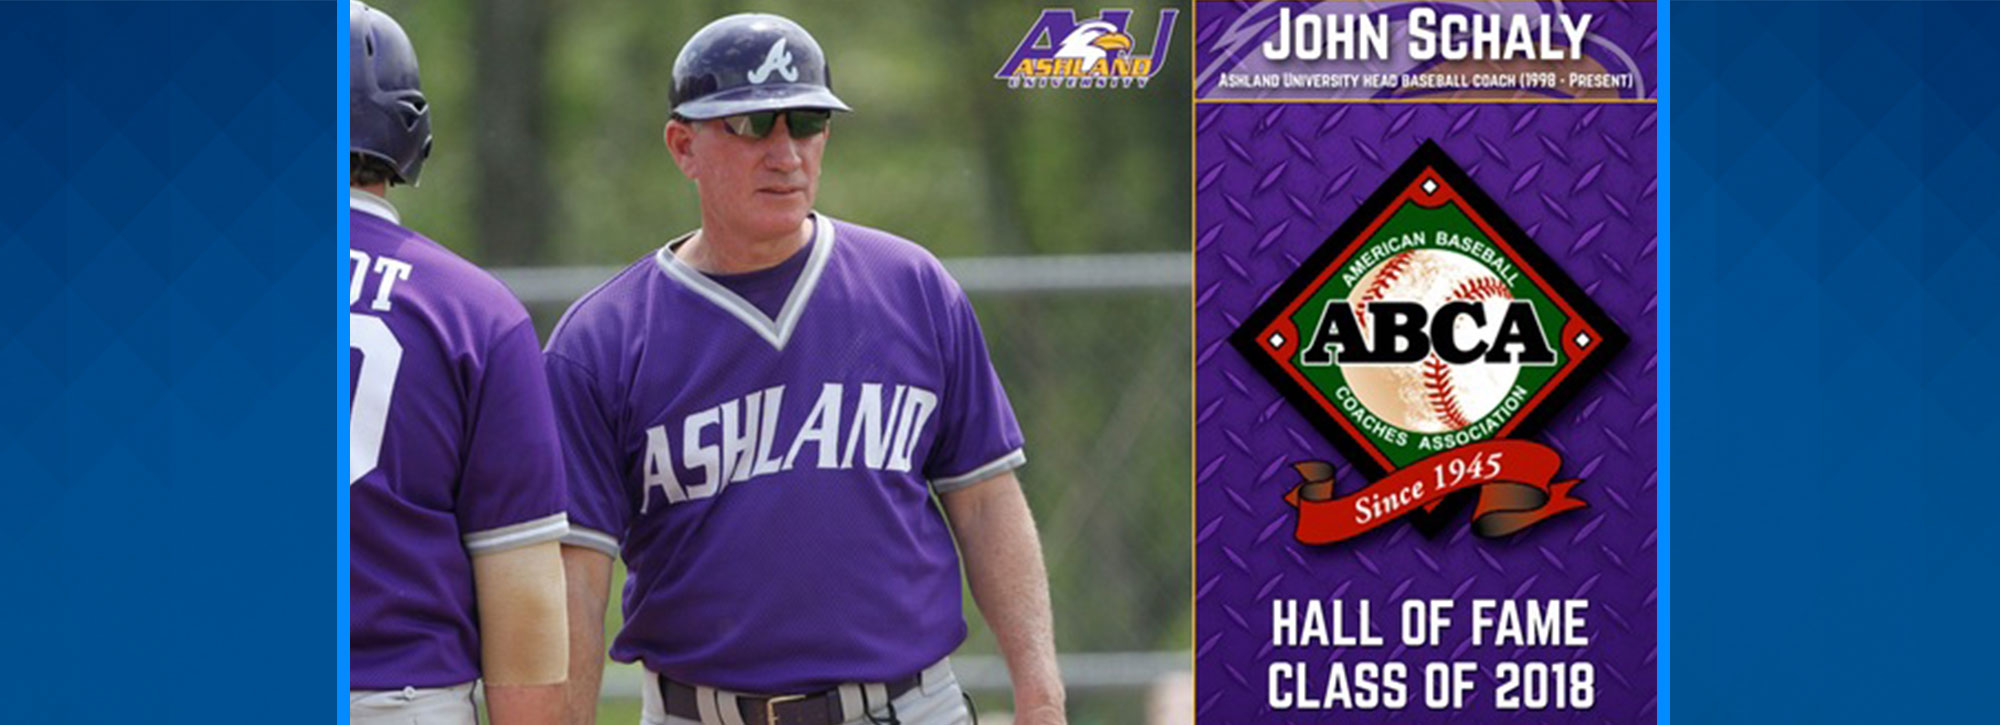 Ashland's Schaly To Enter ABCA Hall Of Fame In 2018 Class